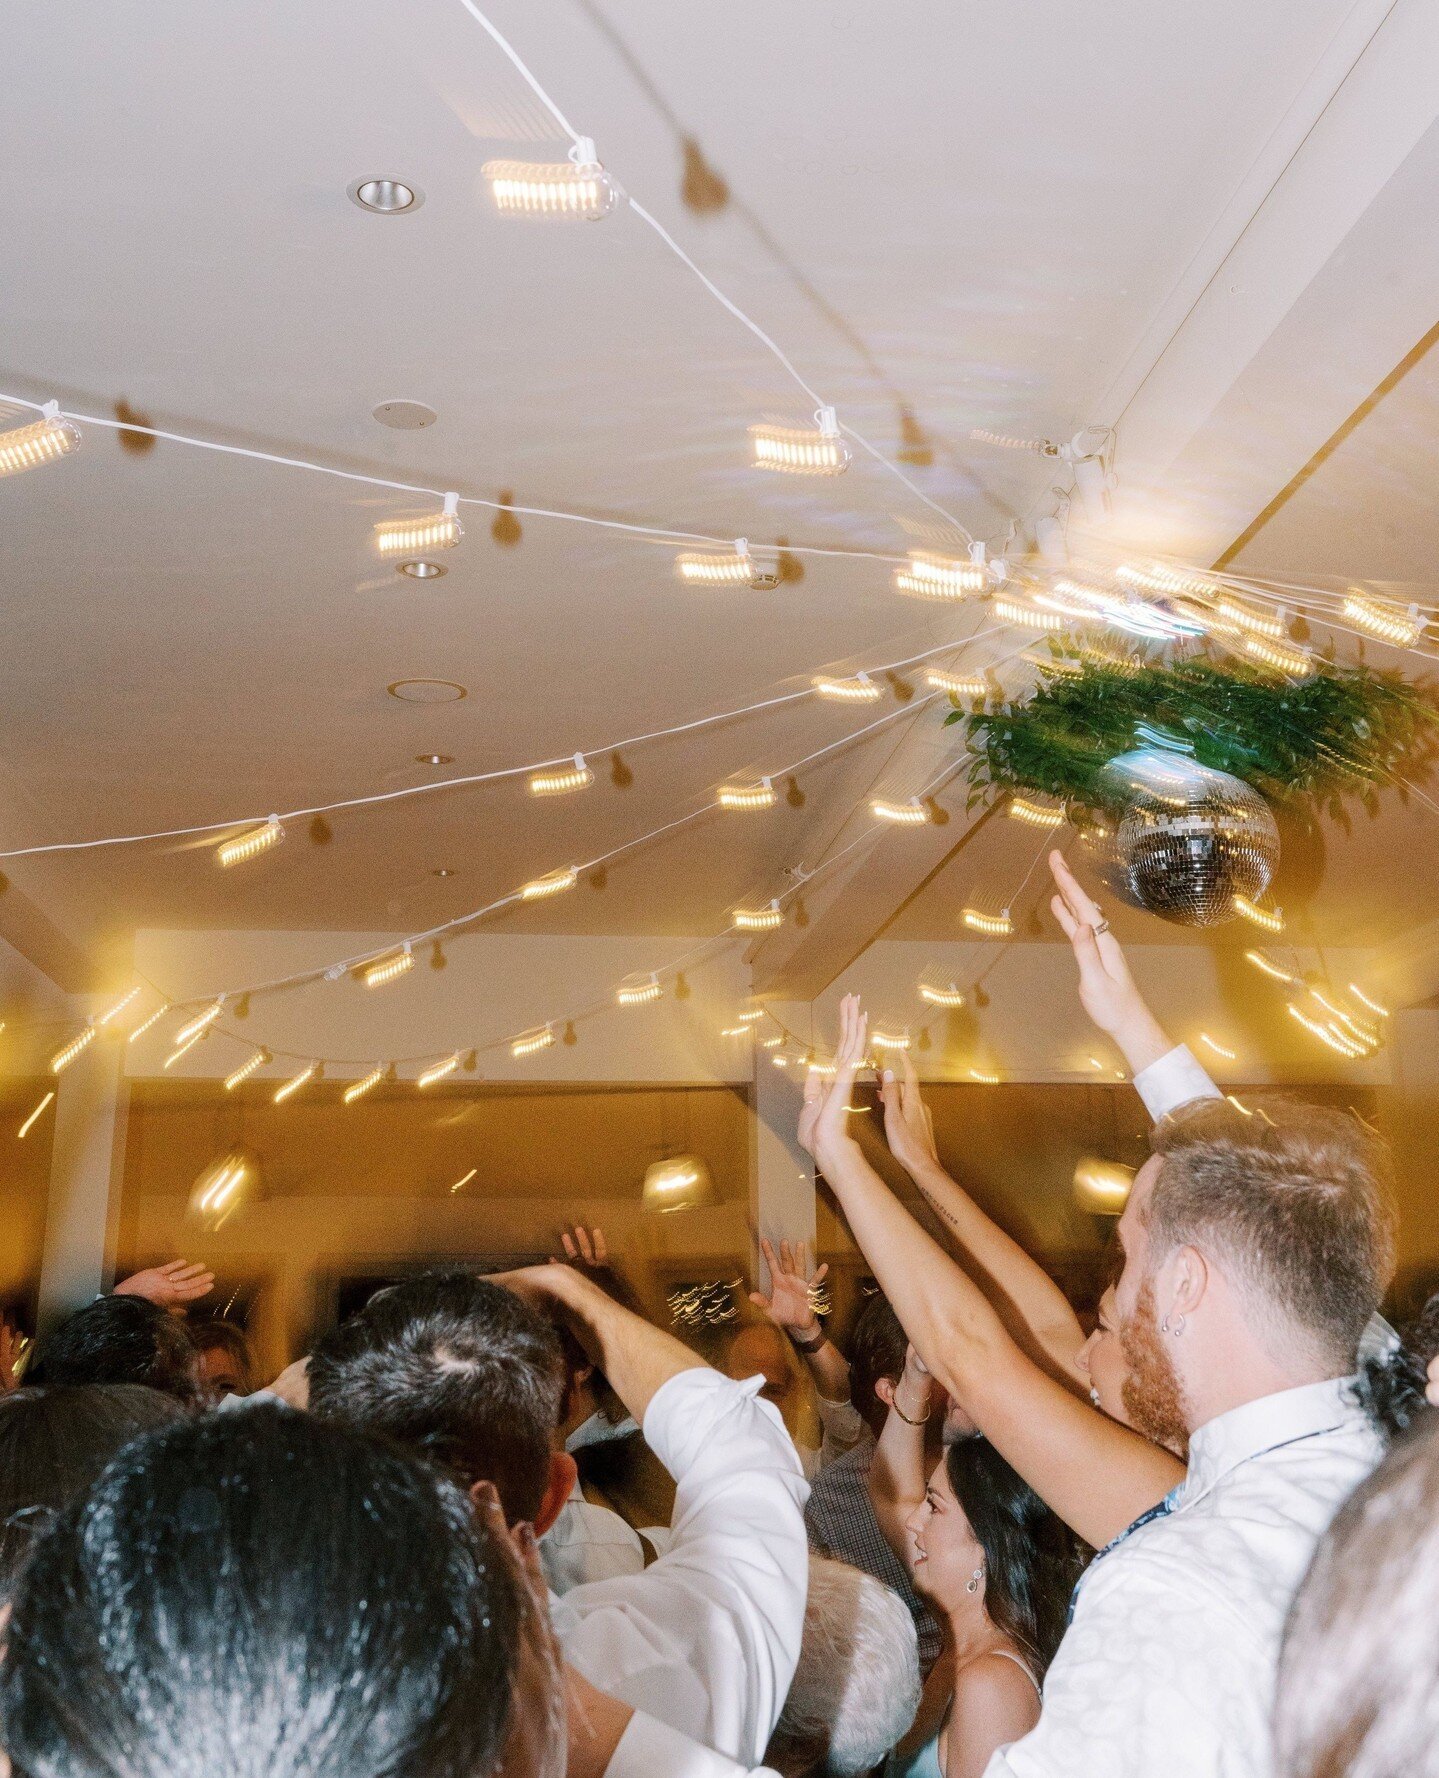 To more blurry nights under a disco ball in 2024!⁠
⁠
Venue @the_garrison⁠
Photography @haleyrichterphoto⁠
Lighting, Decor &amp; Florals @maple_field_floral⁠
⁠